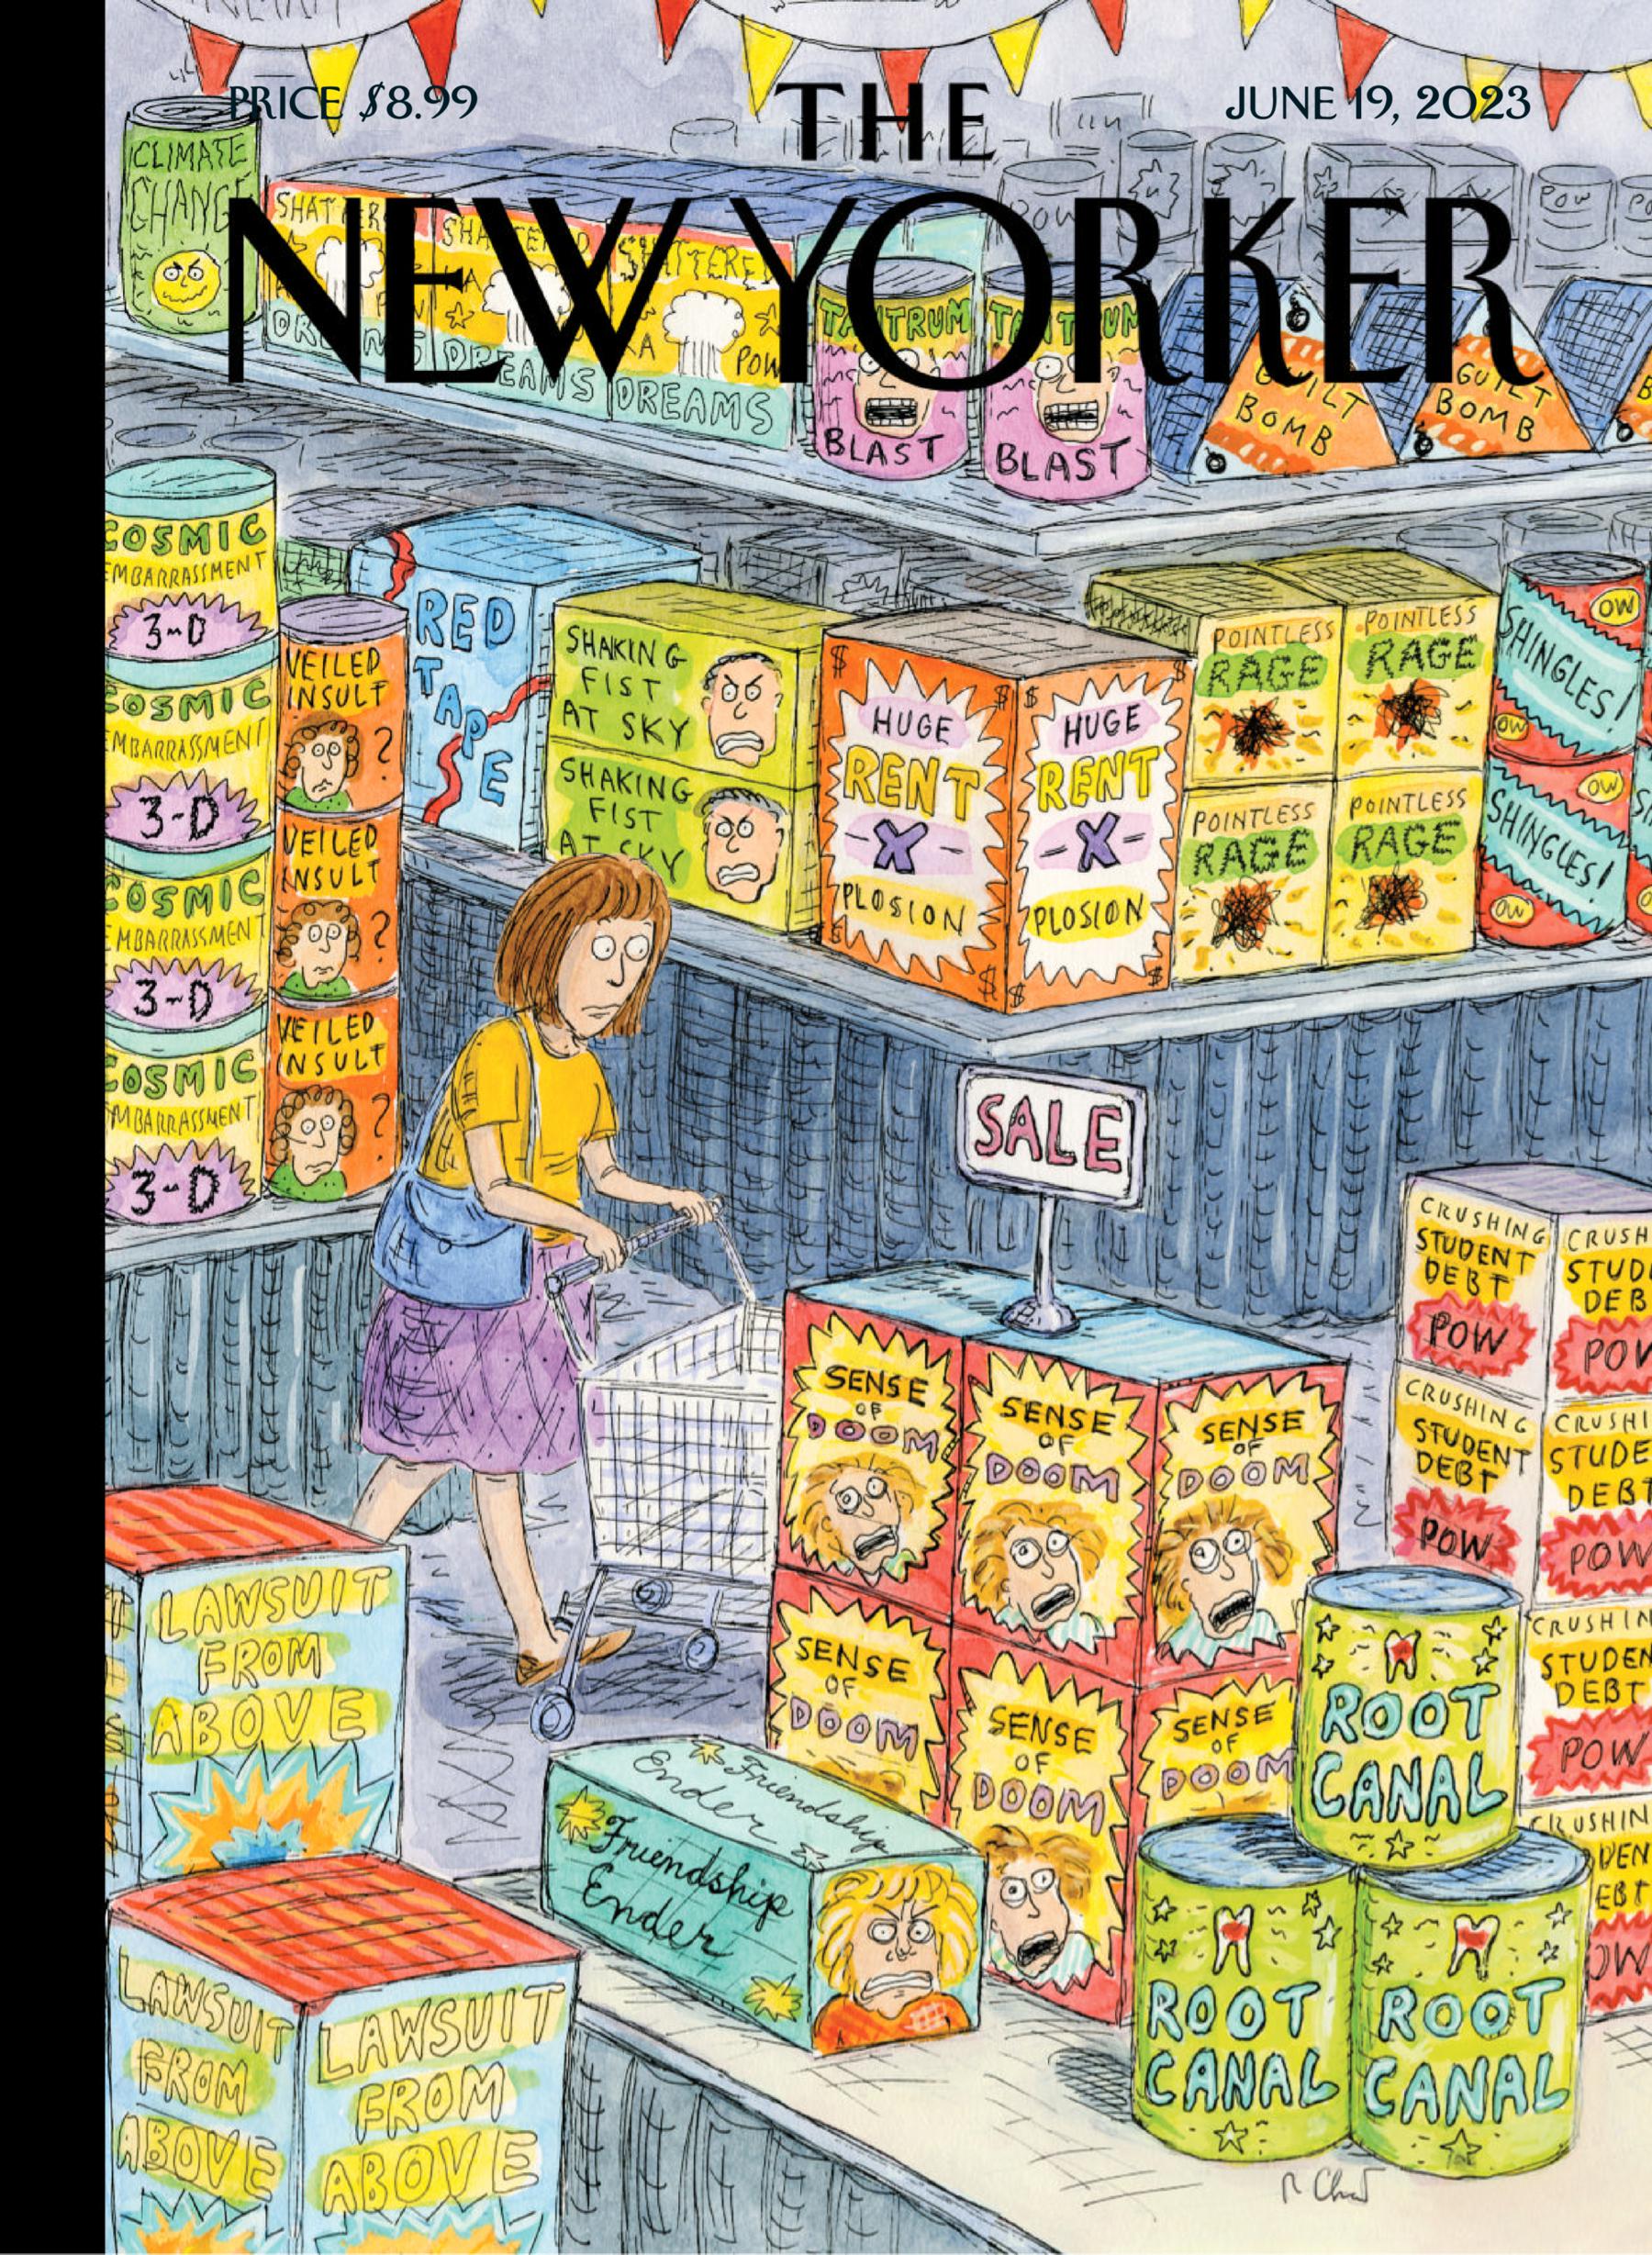 The New Yorker June 19, 2023 SoftArchive